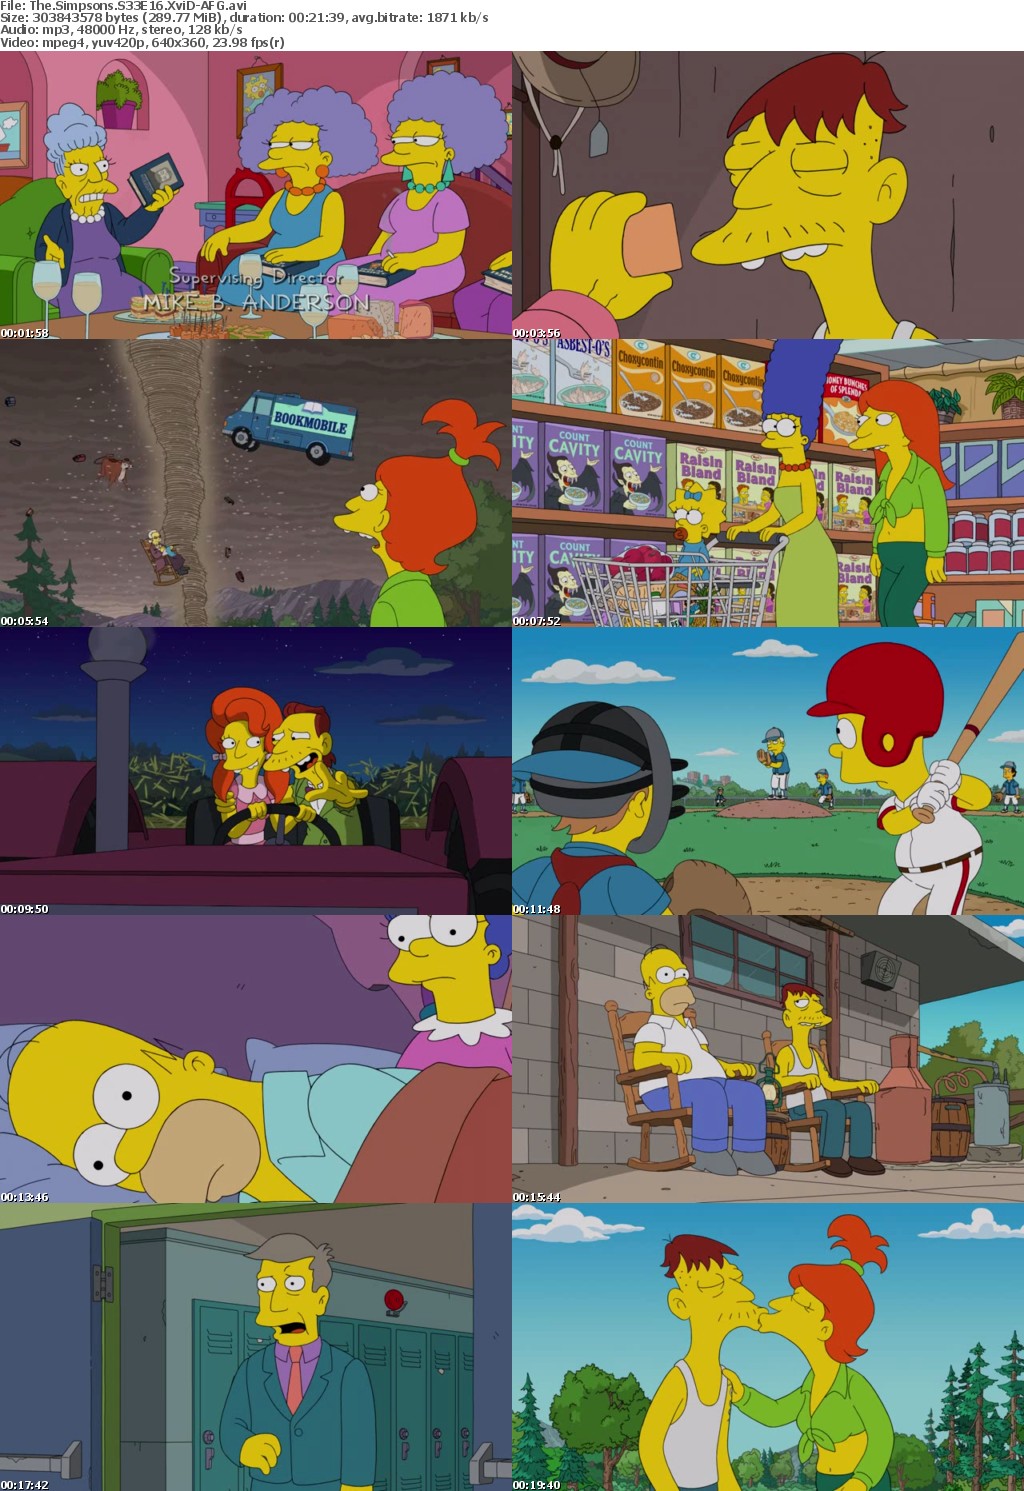 The Simpsons S33E16 XviD-AFG